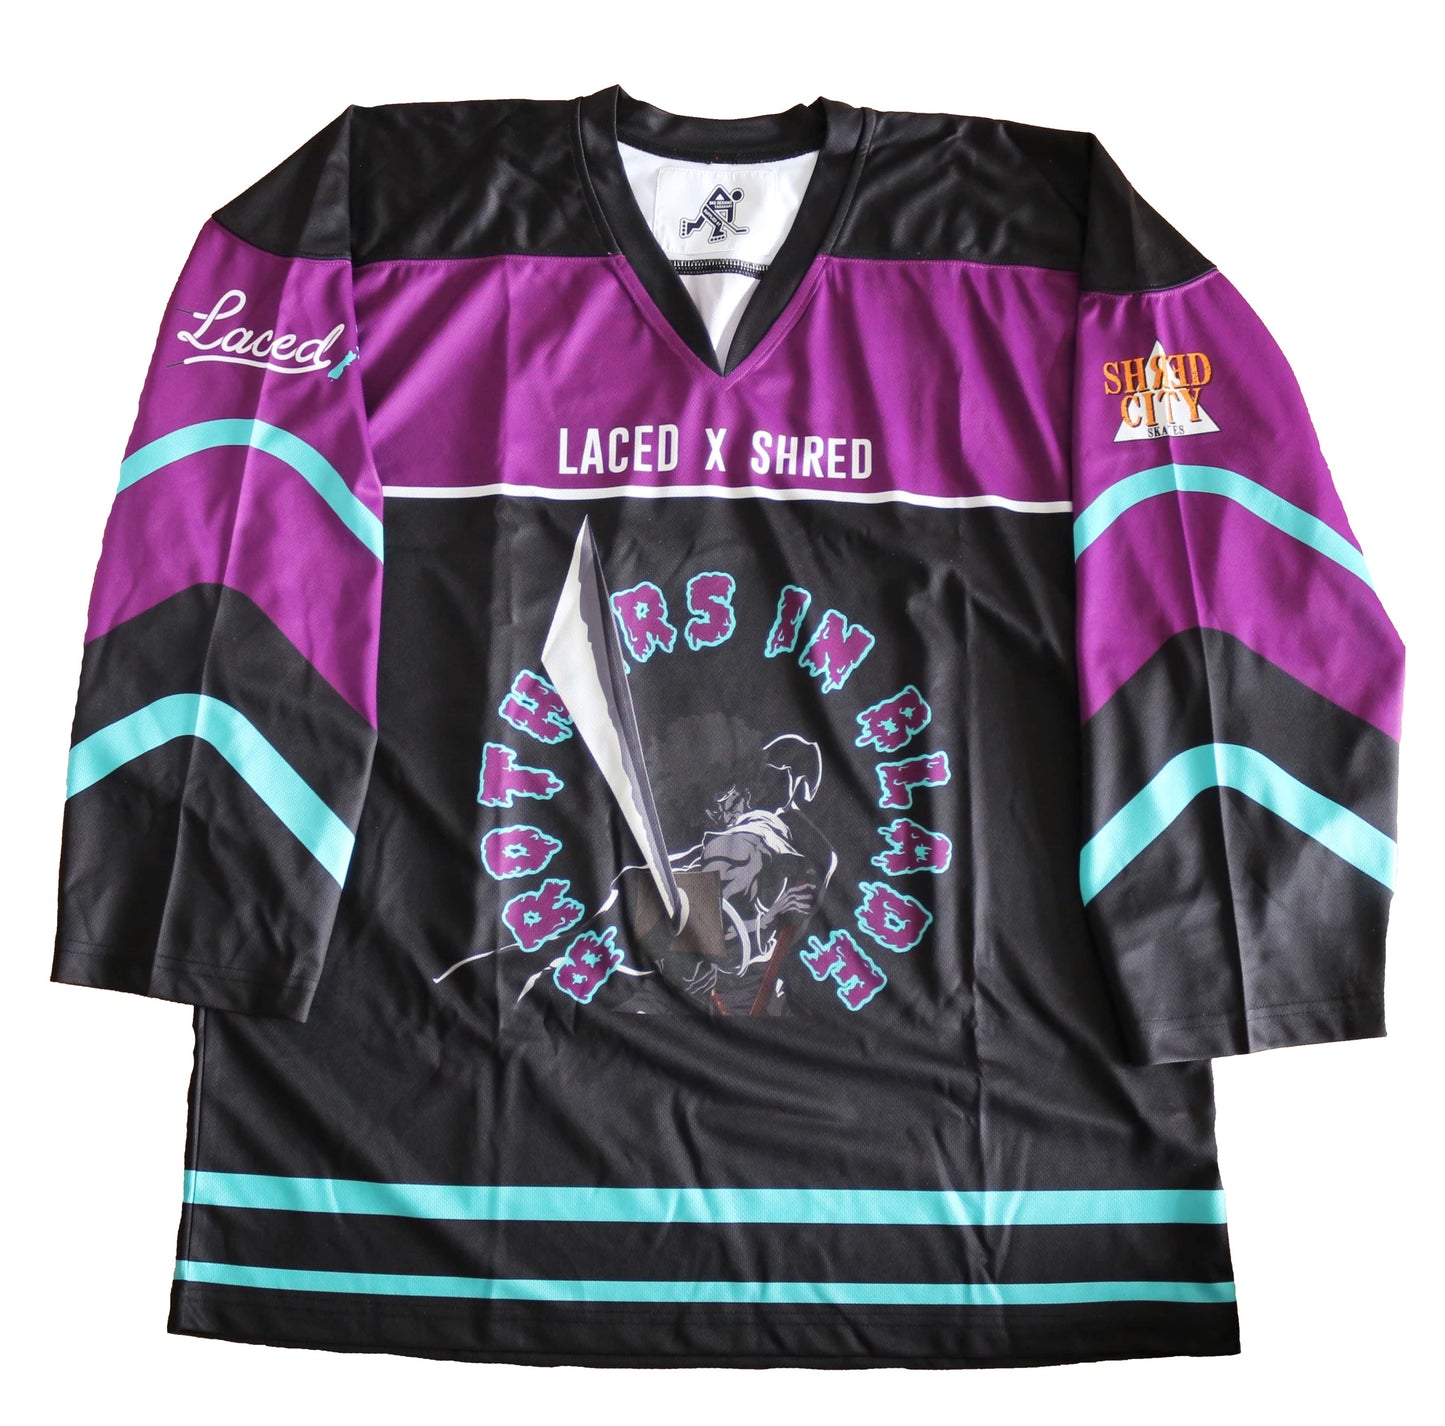 Brothers in Blade Hockey Jersey - XL Only